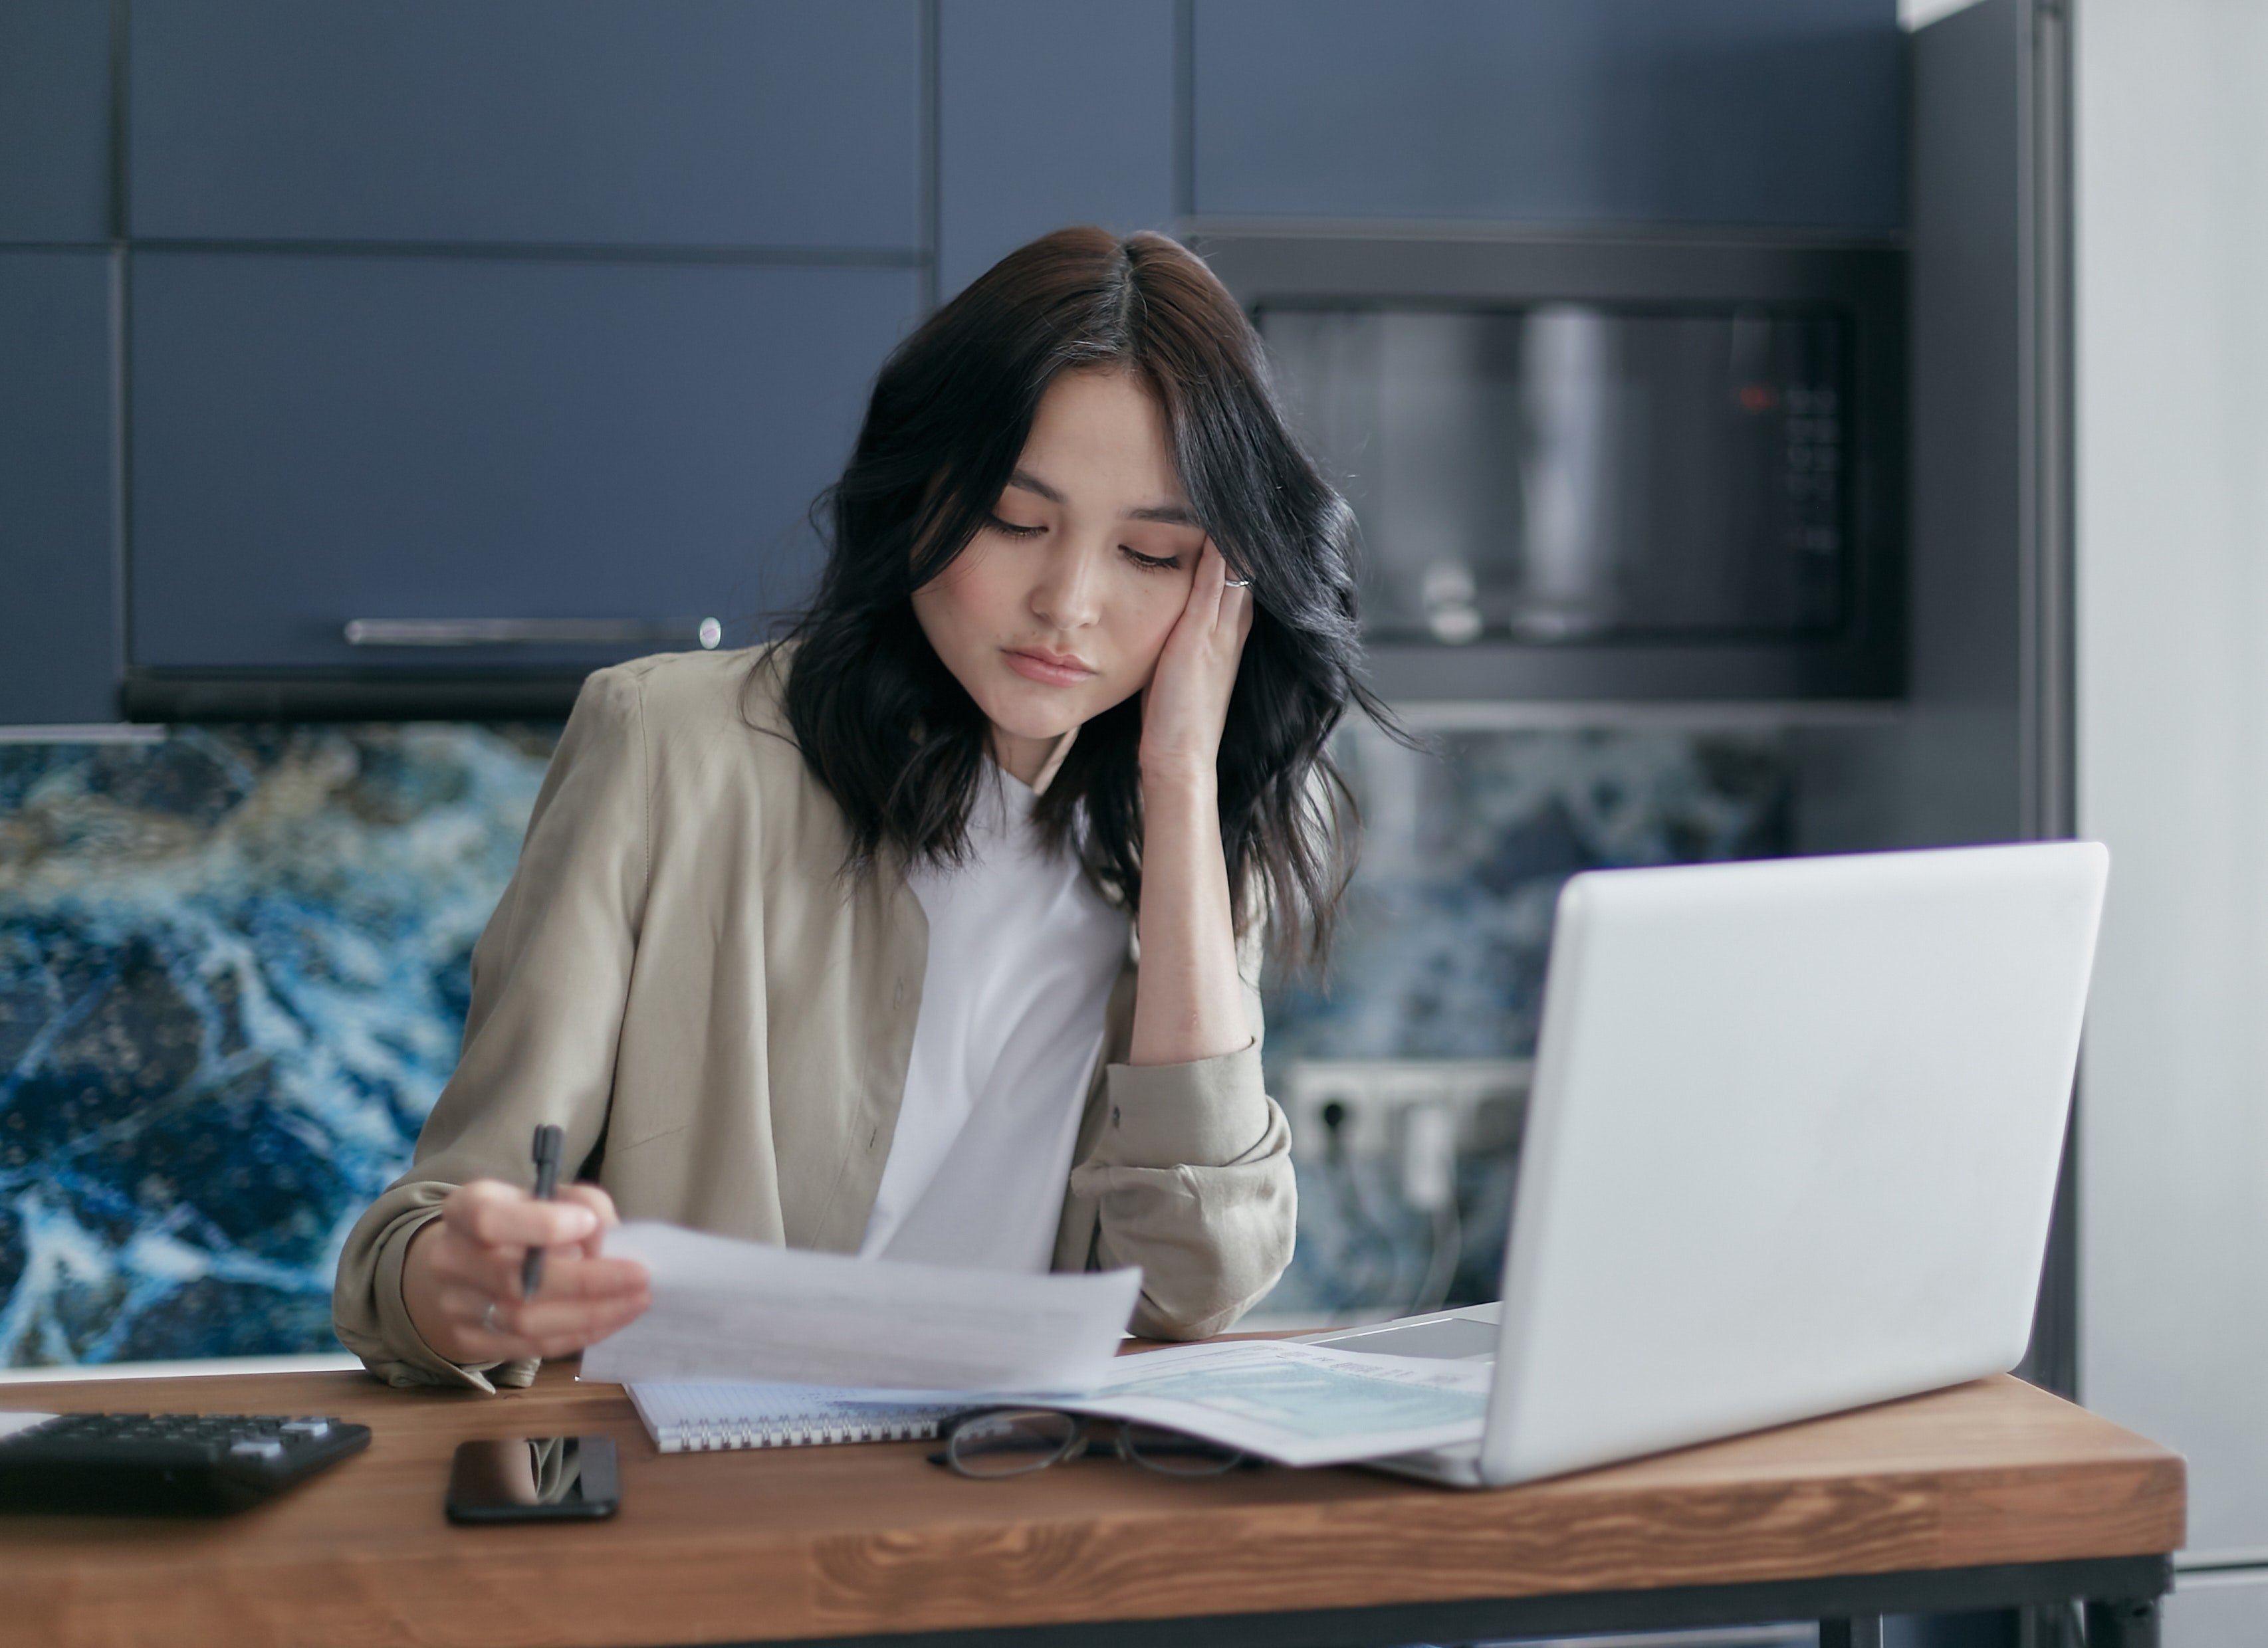 A woman starring down at a document while seated in the kitchen | Source: Pexels